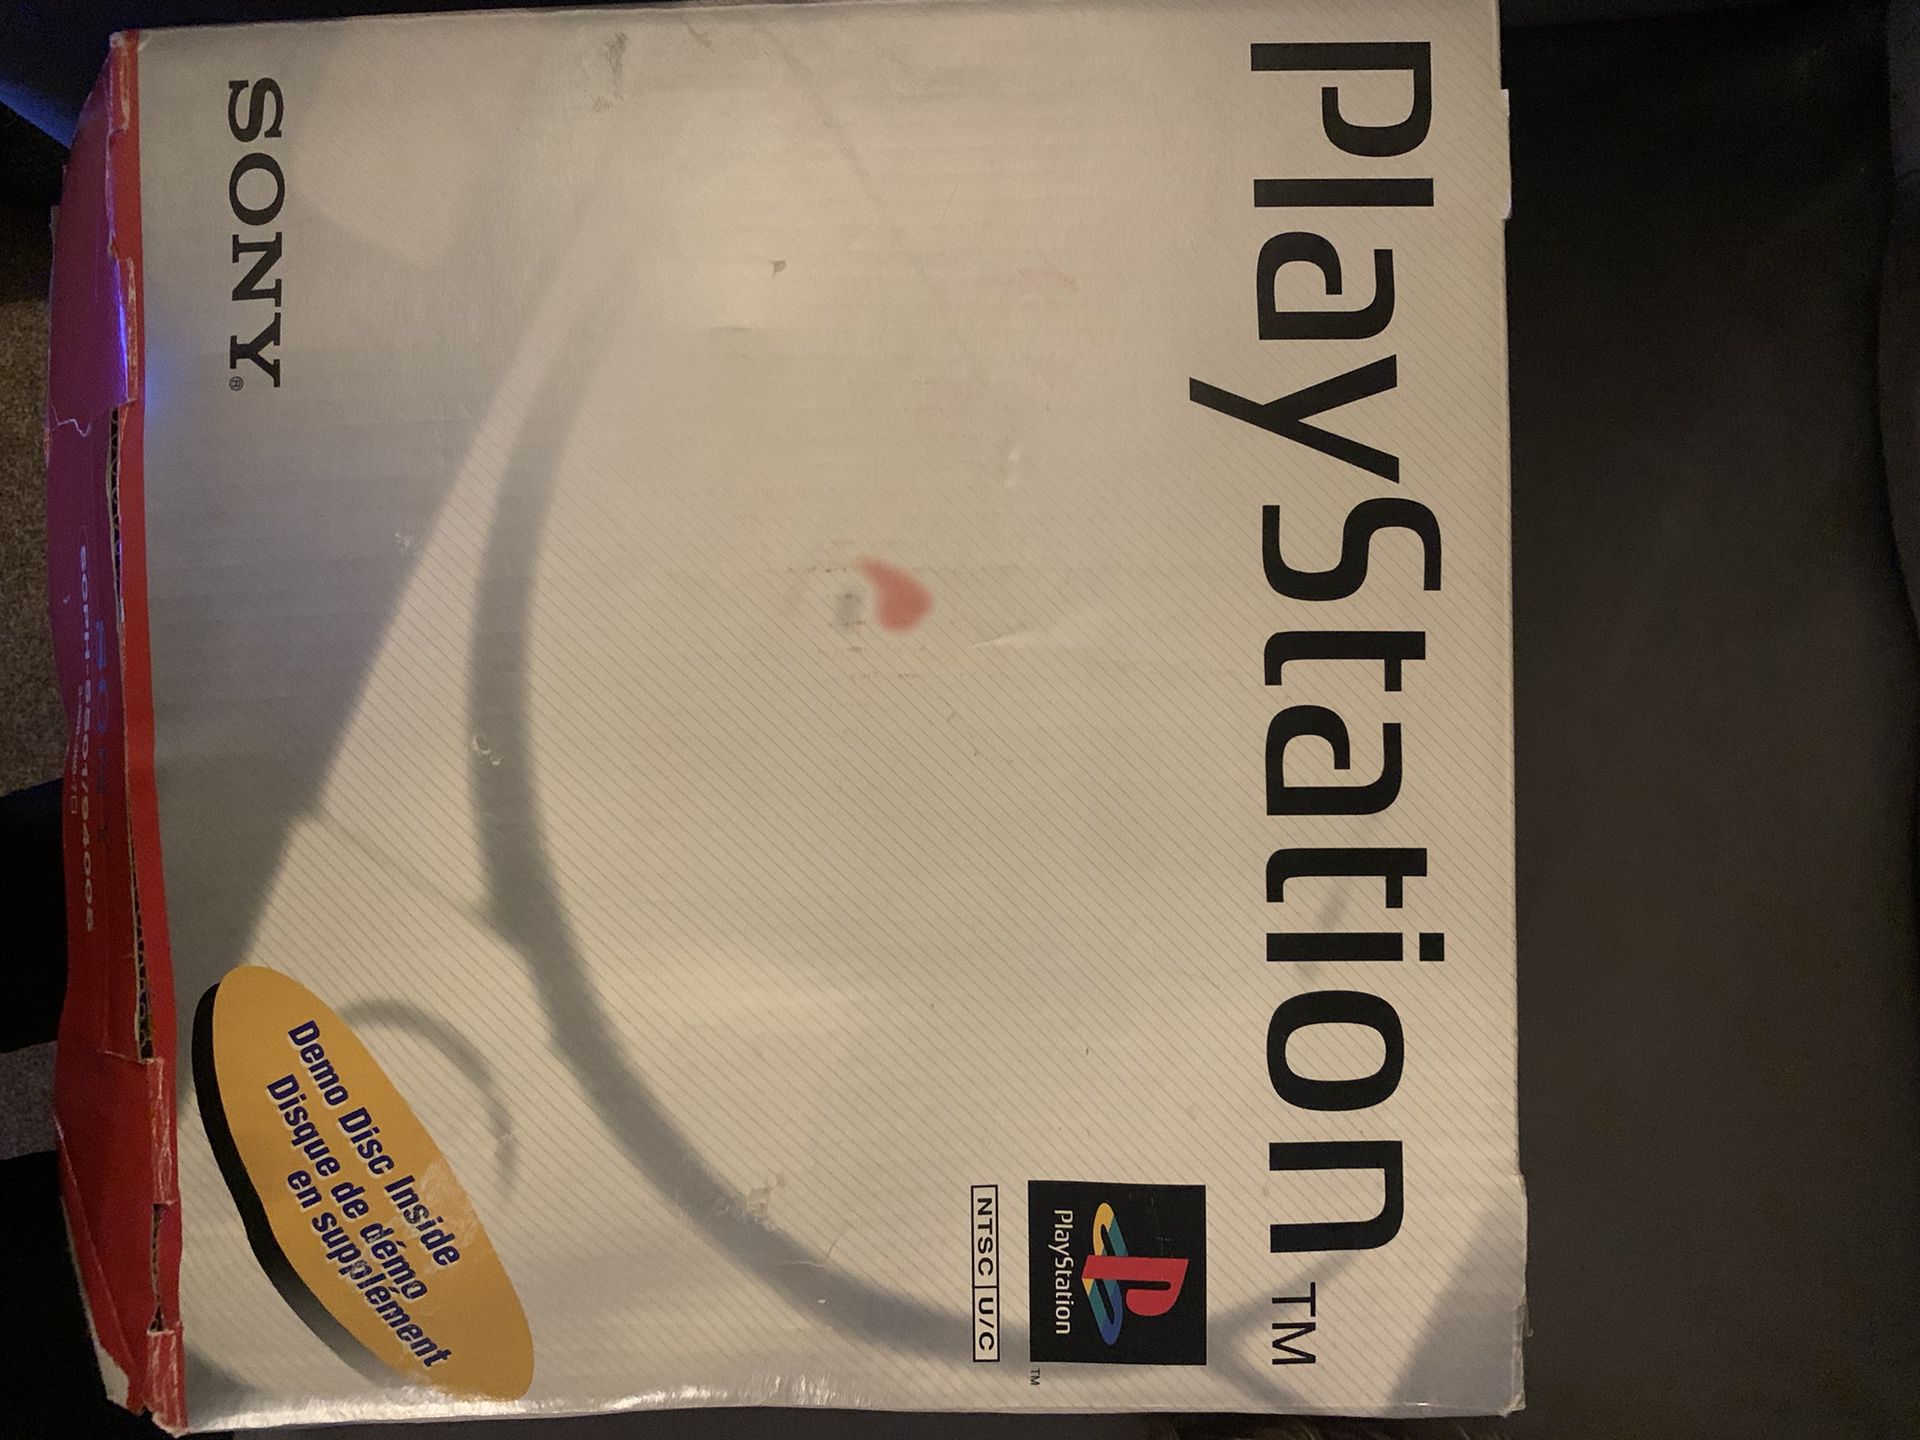 Playstation 1 Video Game Consoles for sale in Tipton Ford